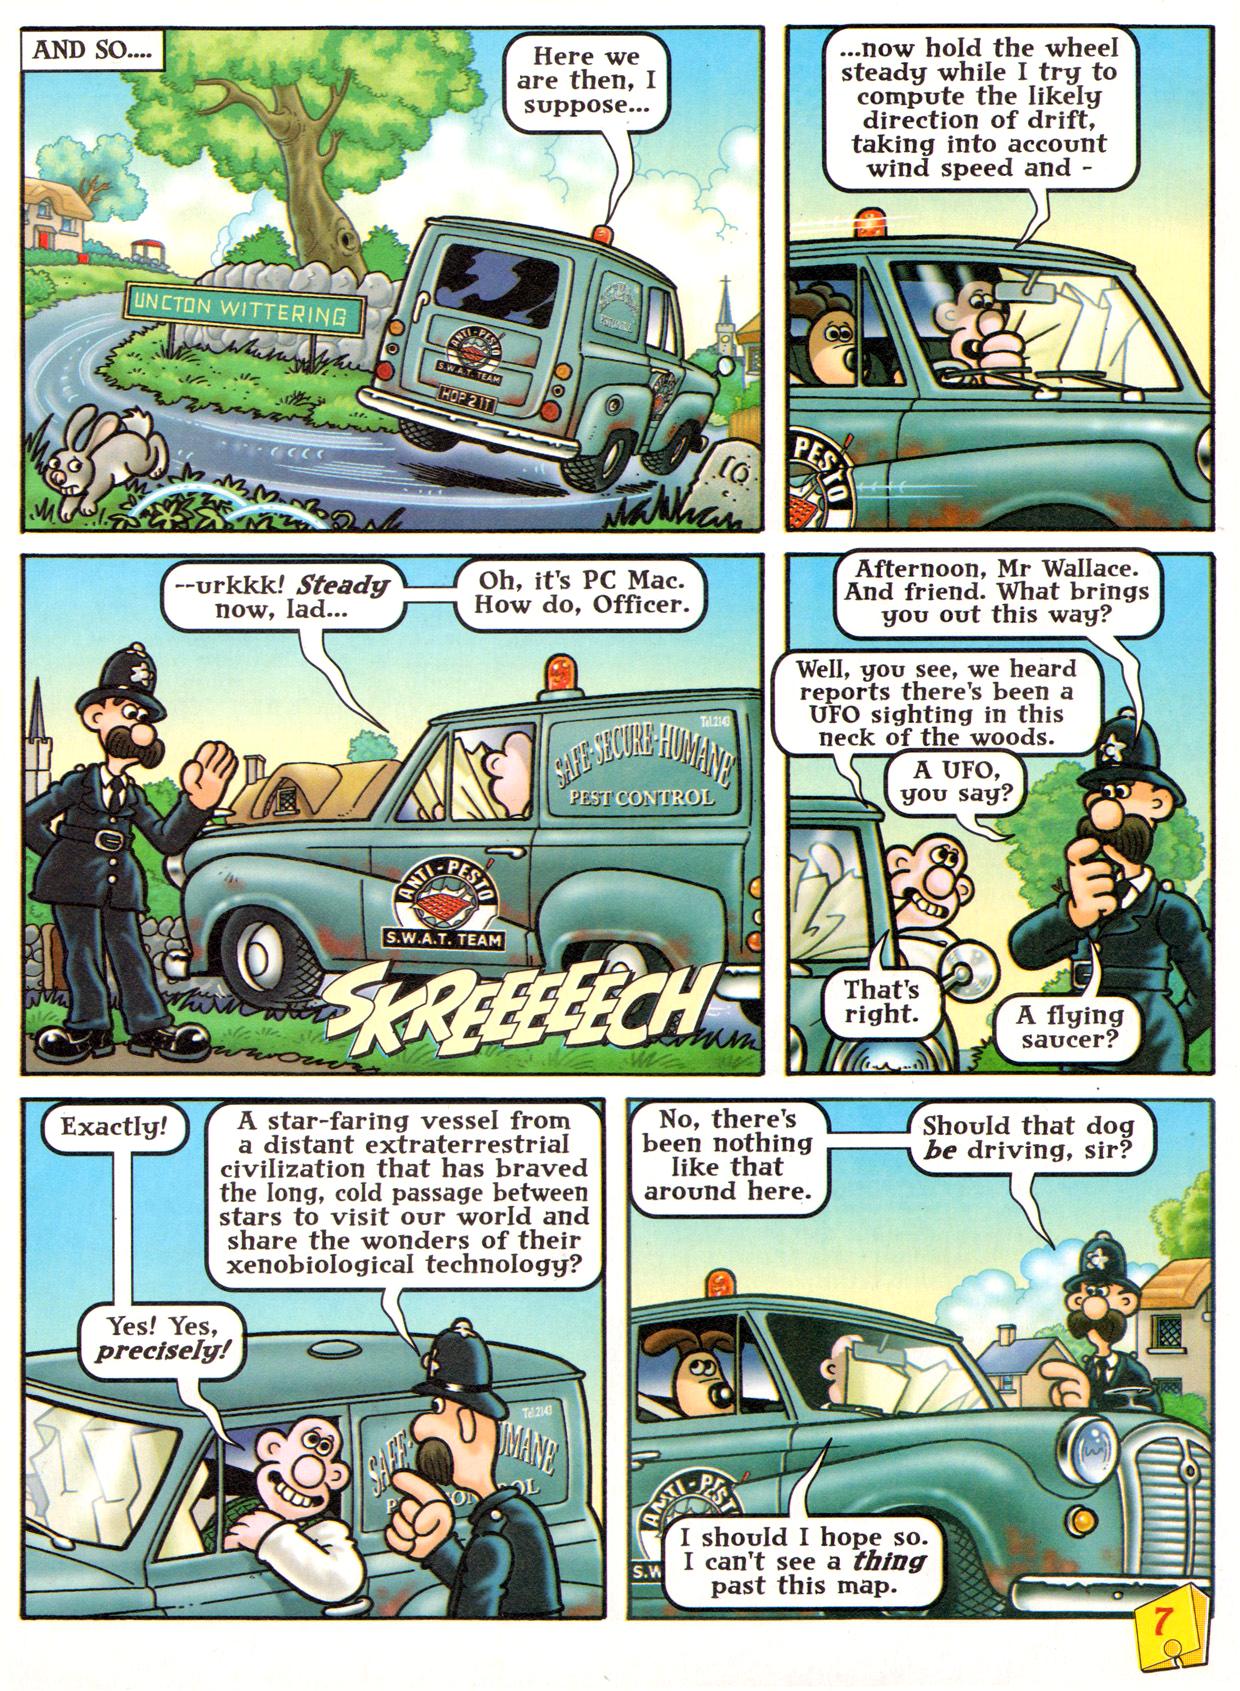 Read online Wallace & Gromit Comic comic -  Issue #10 - 7